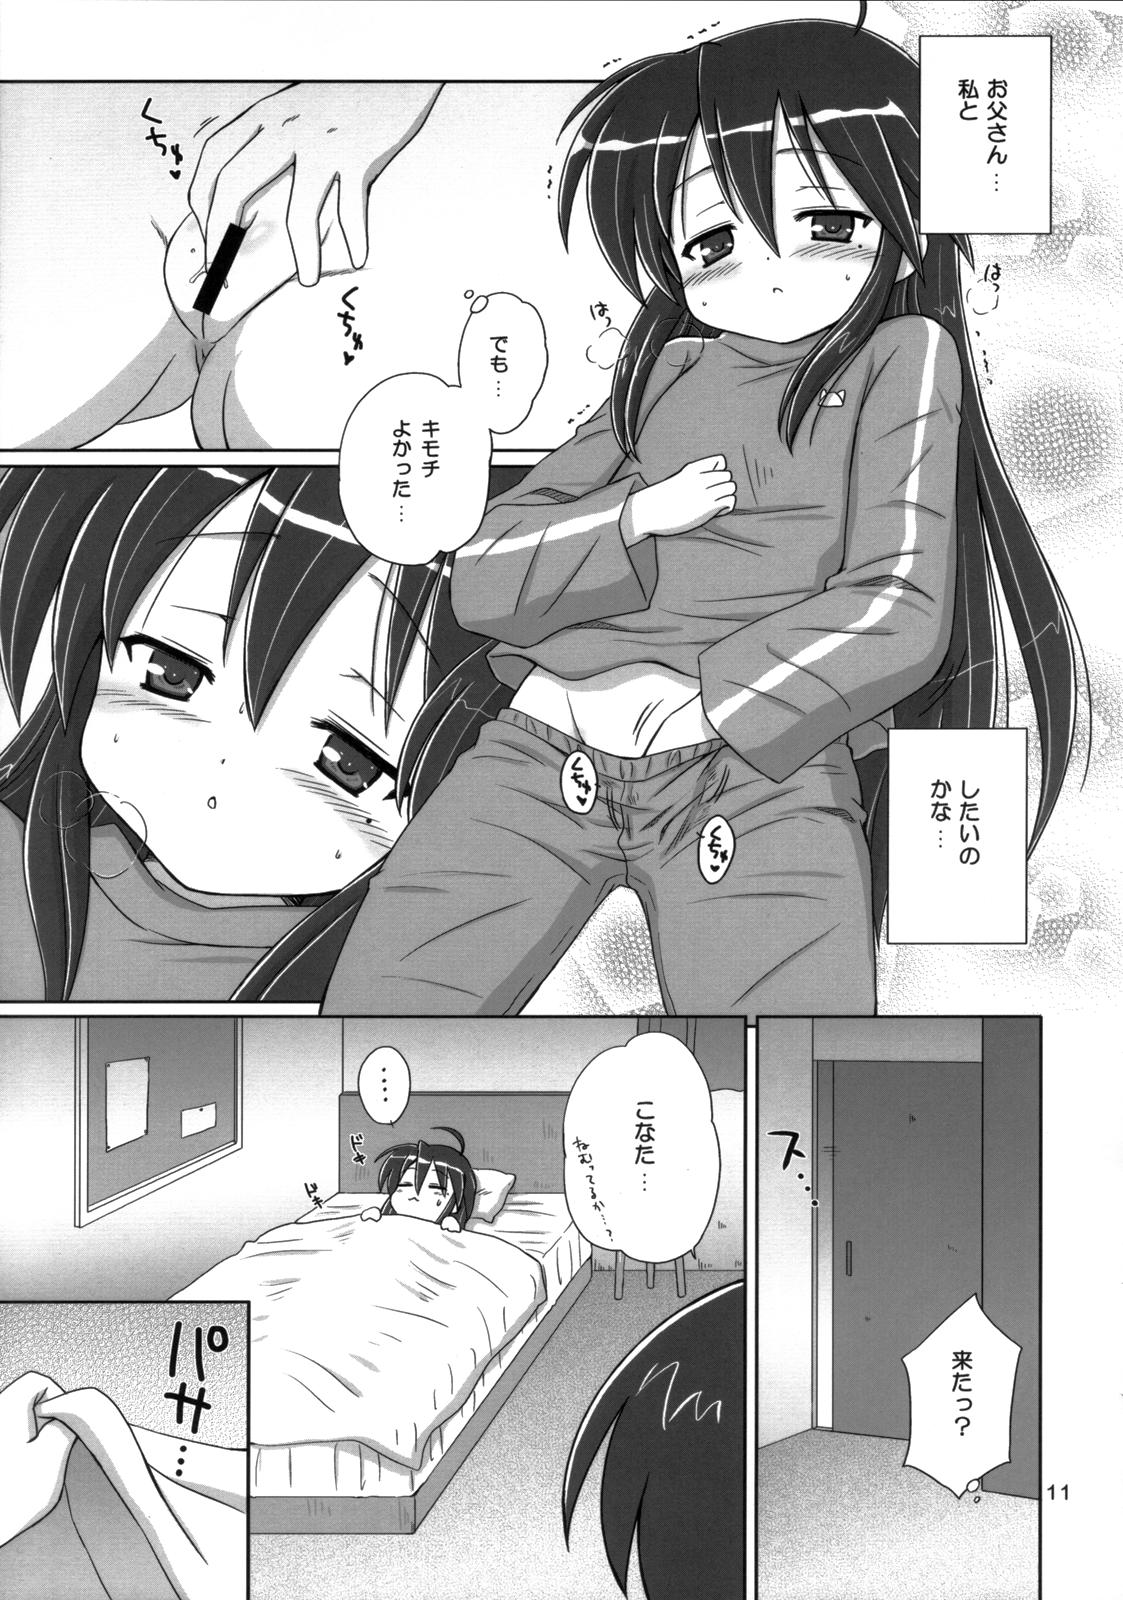 Nylons Konata Flavor - Lucky star Softcore - Page 10